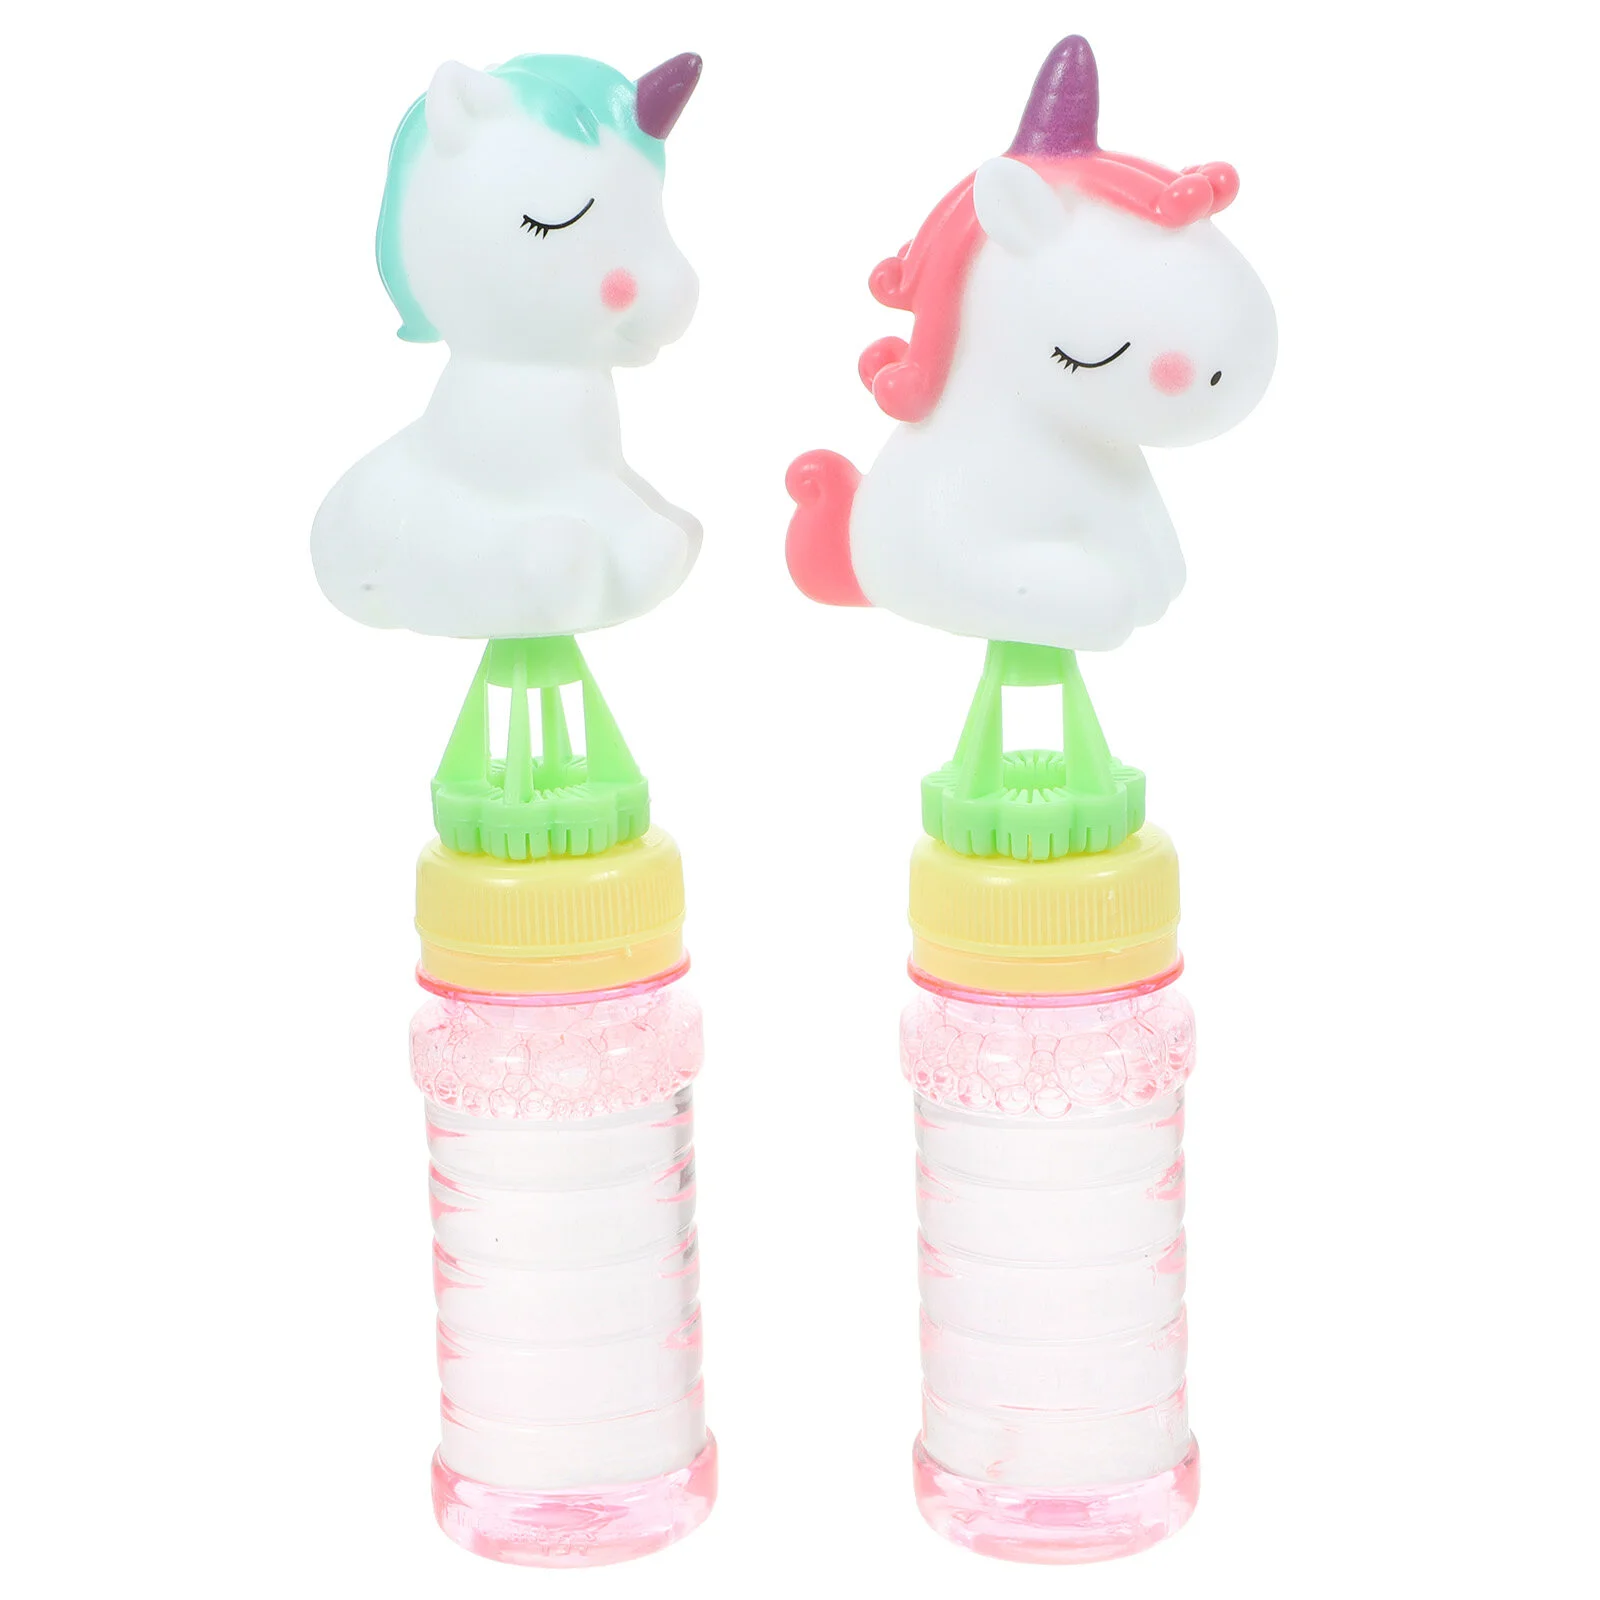 

2 Pcs Blowing Bubble Wand Toddler Toys Maker Sticks Wands Kids Gift Party Favor Bubbles Toddlers Small Birthday Favors